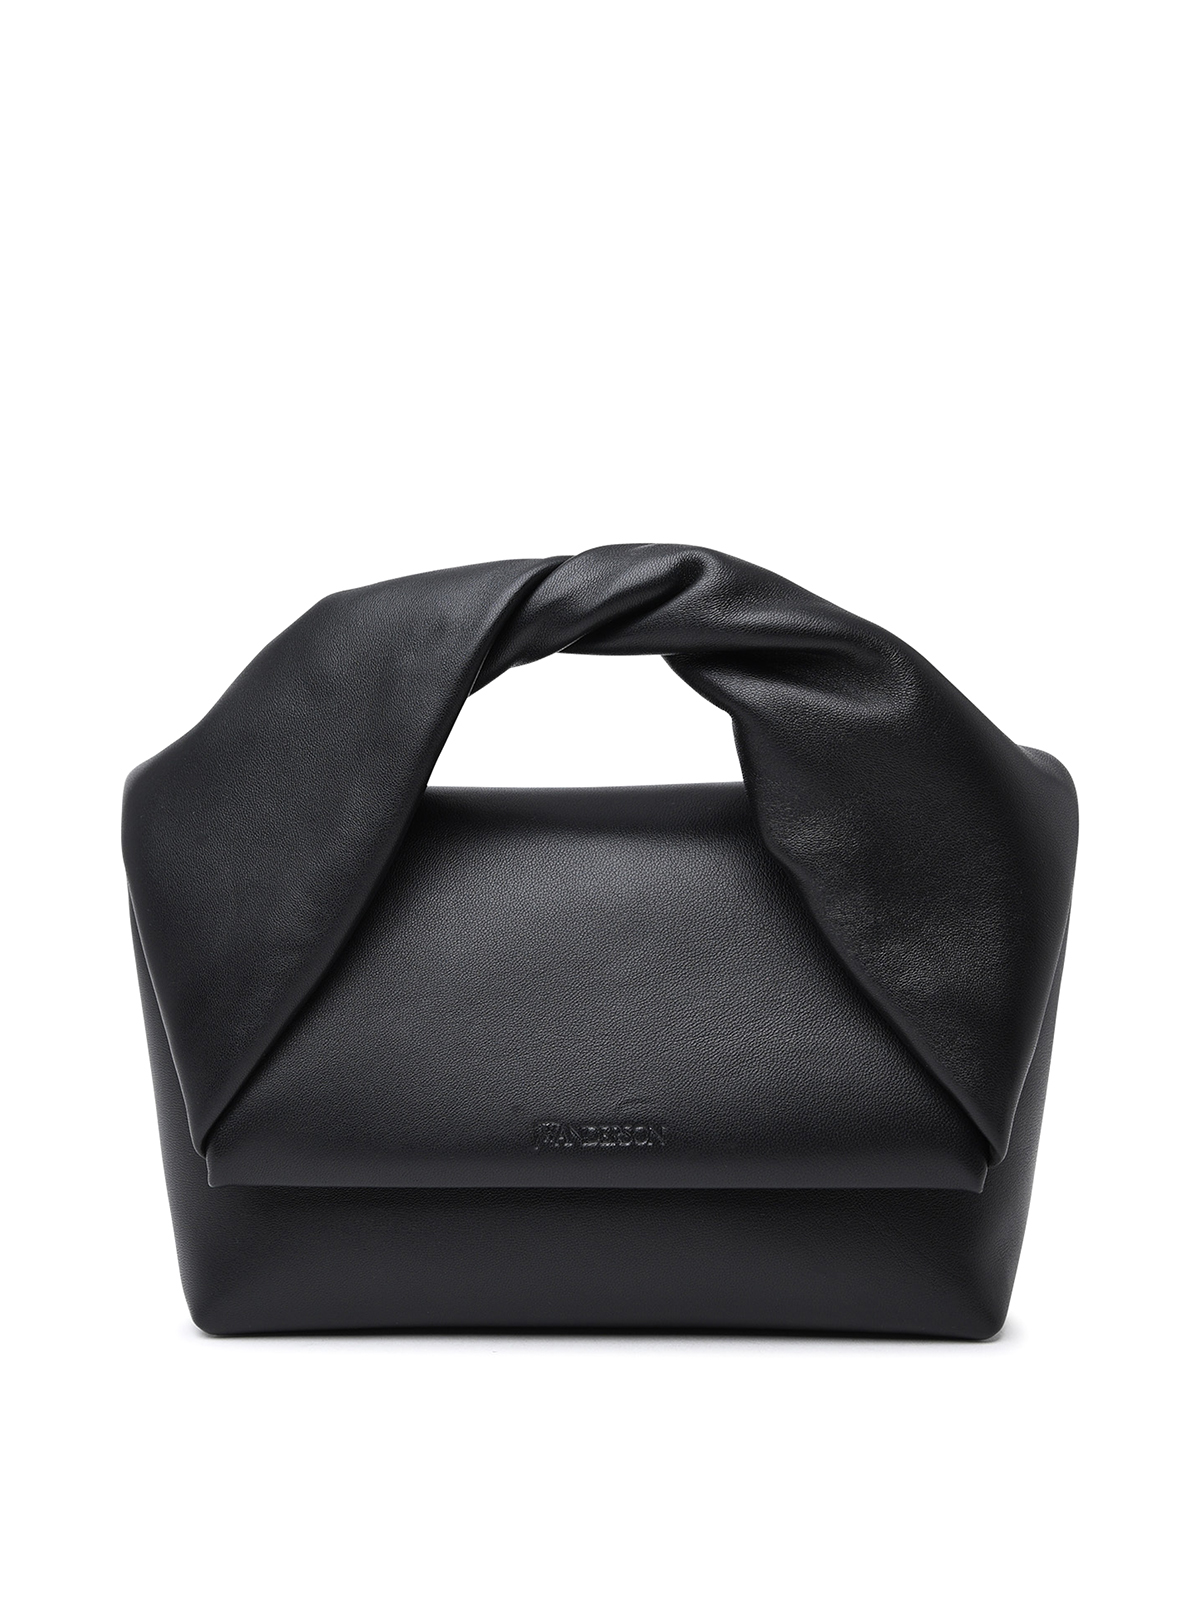 Jw Anderson Large Twister Bag In Black Leather